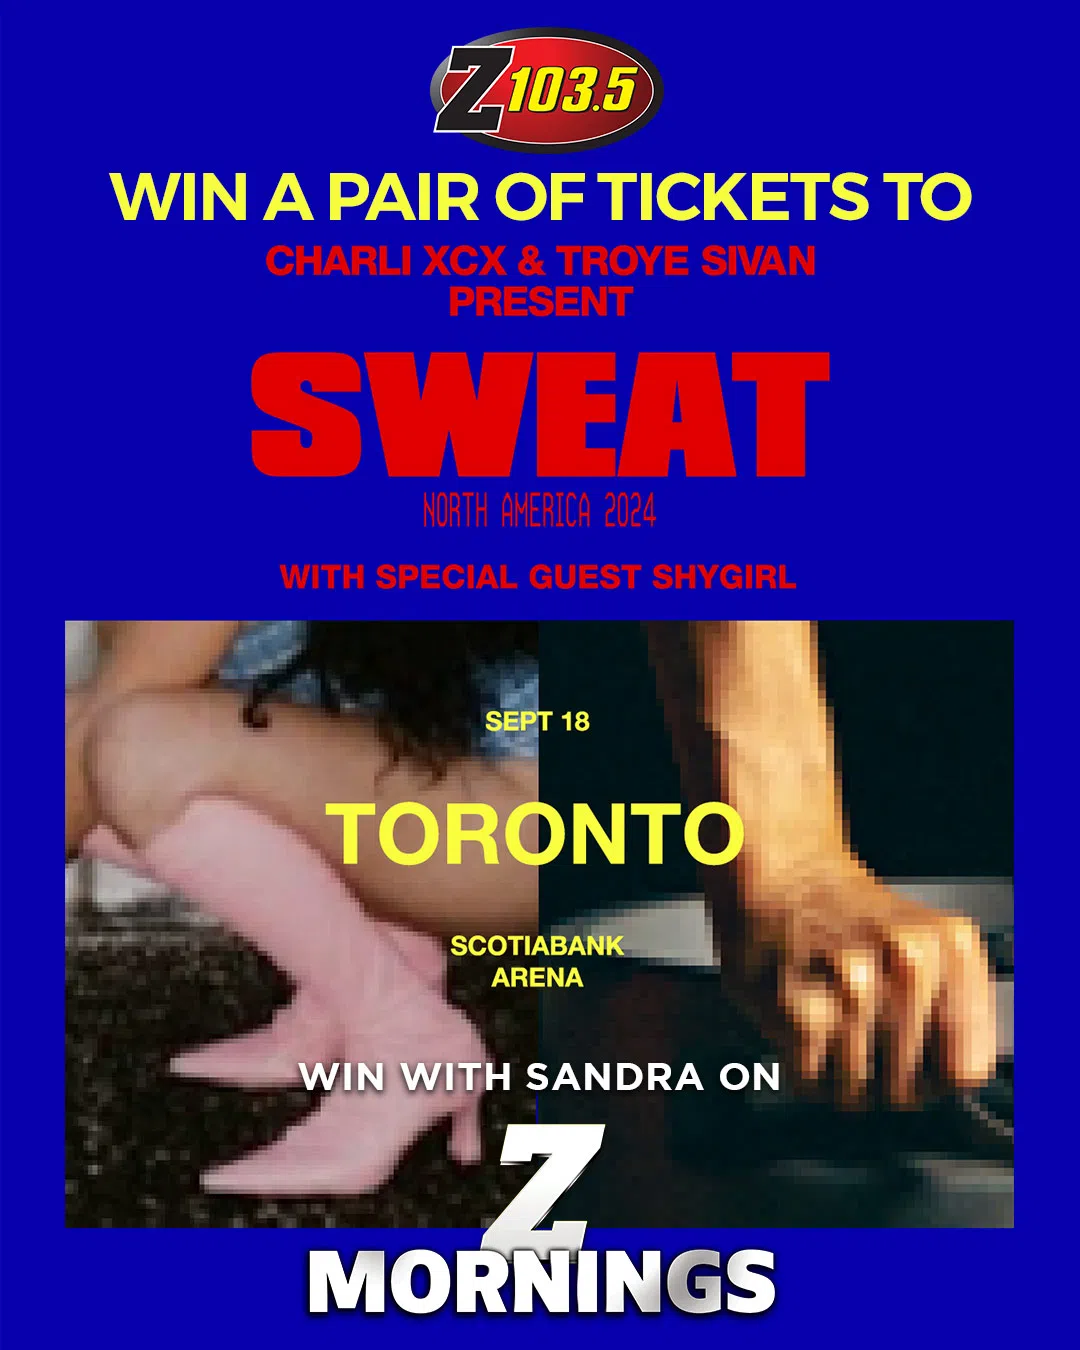 Feature: https://z1035.com/win/win-tickets-to-see-charlie-xcx-troye-sivan/